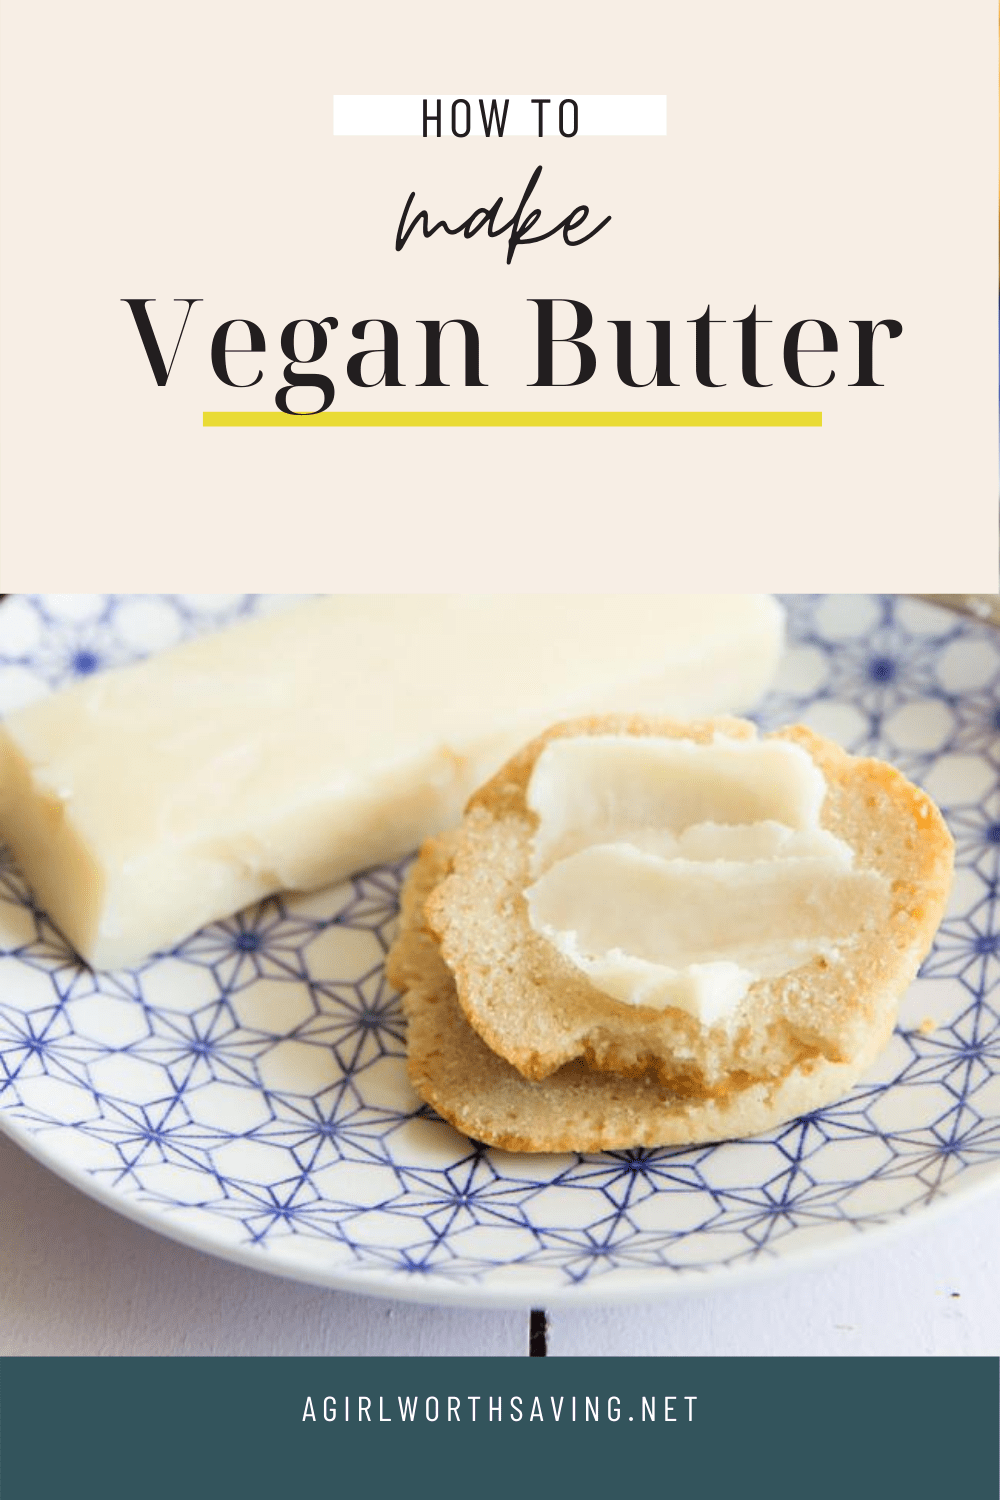 Making homemade butter was never easier. Learn how to make vegan butter that is spreadable and tastes like the butter you use to eat without any chemical ingredients found in store bought brands.